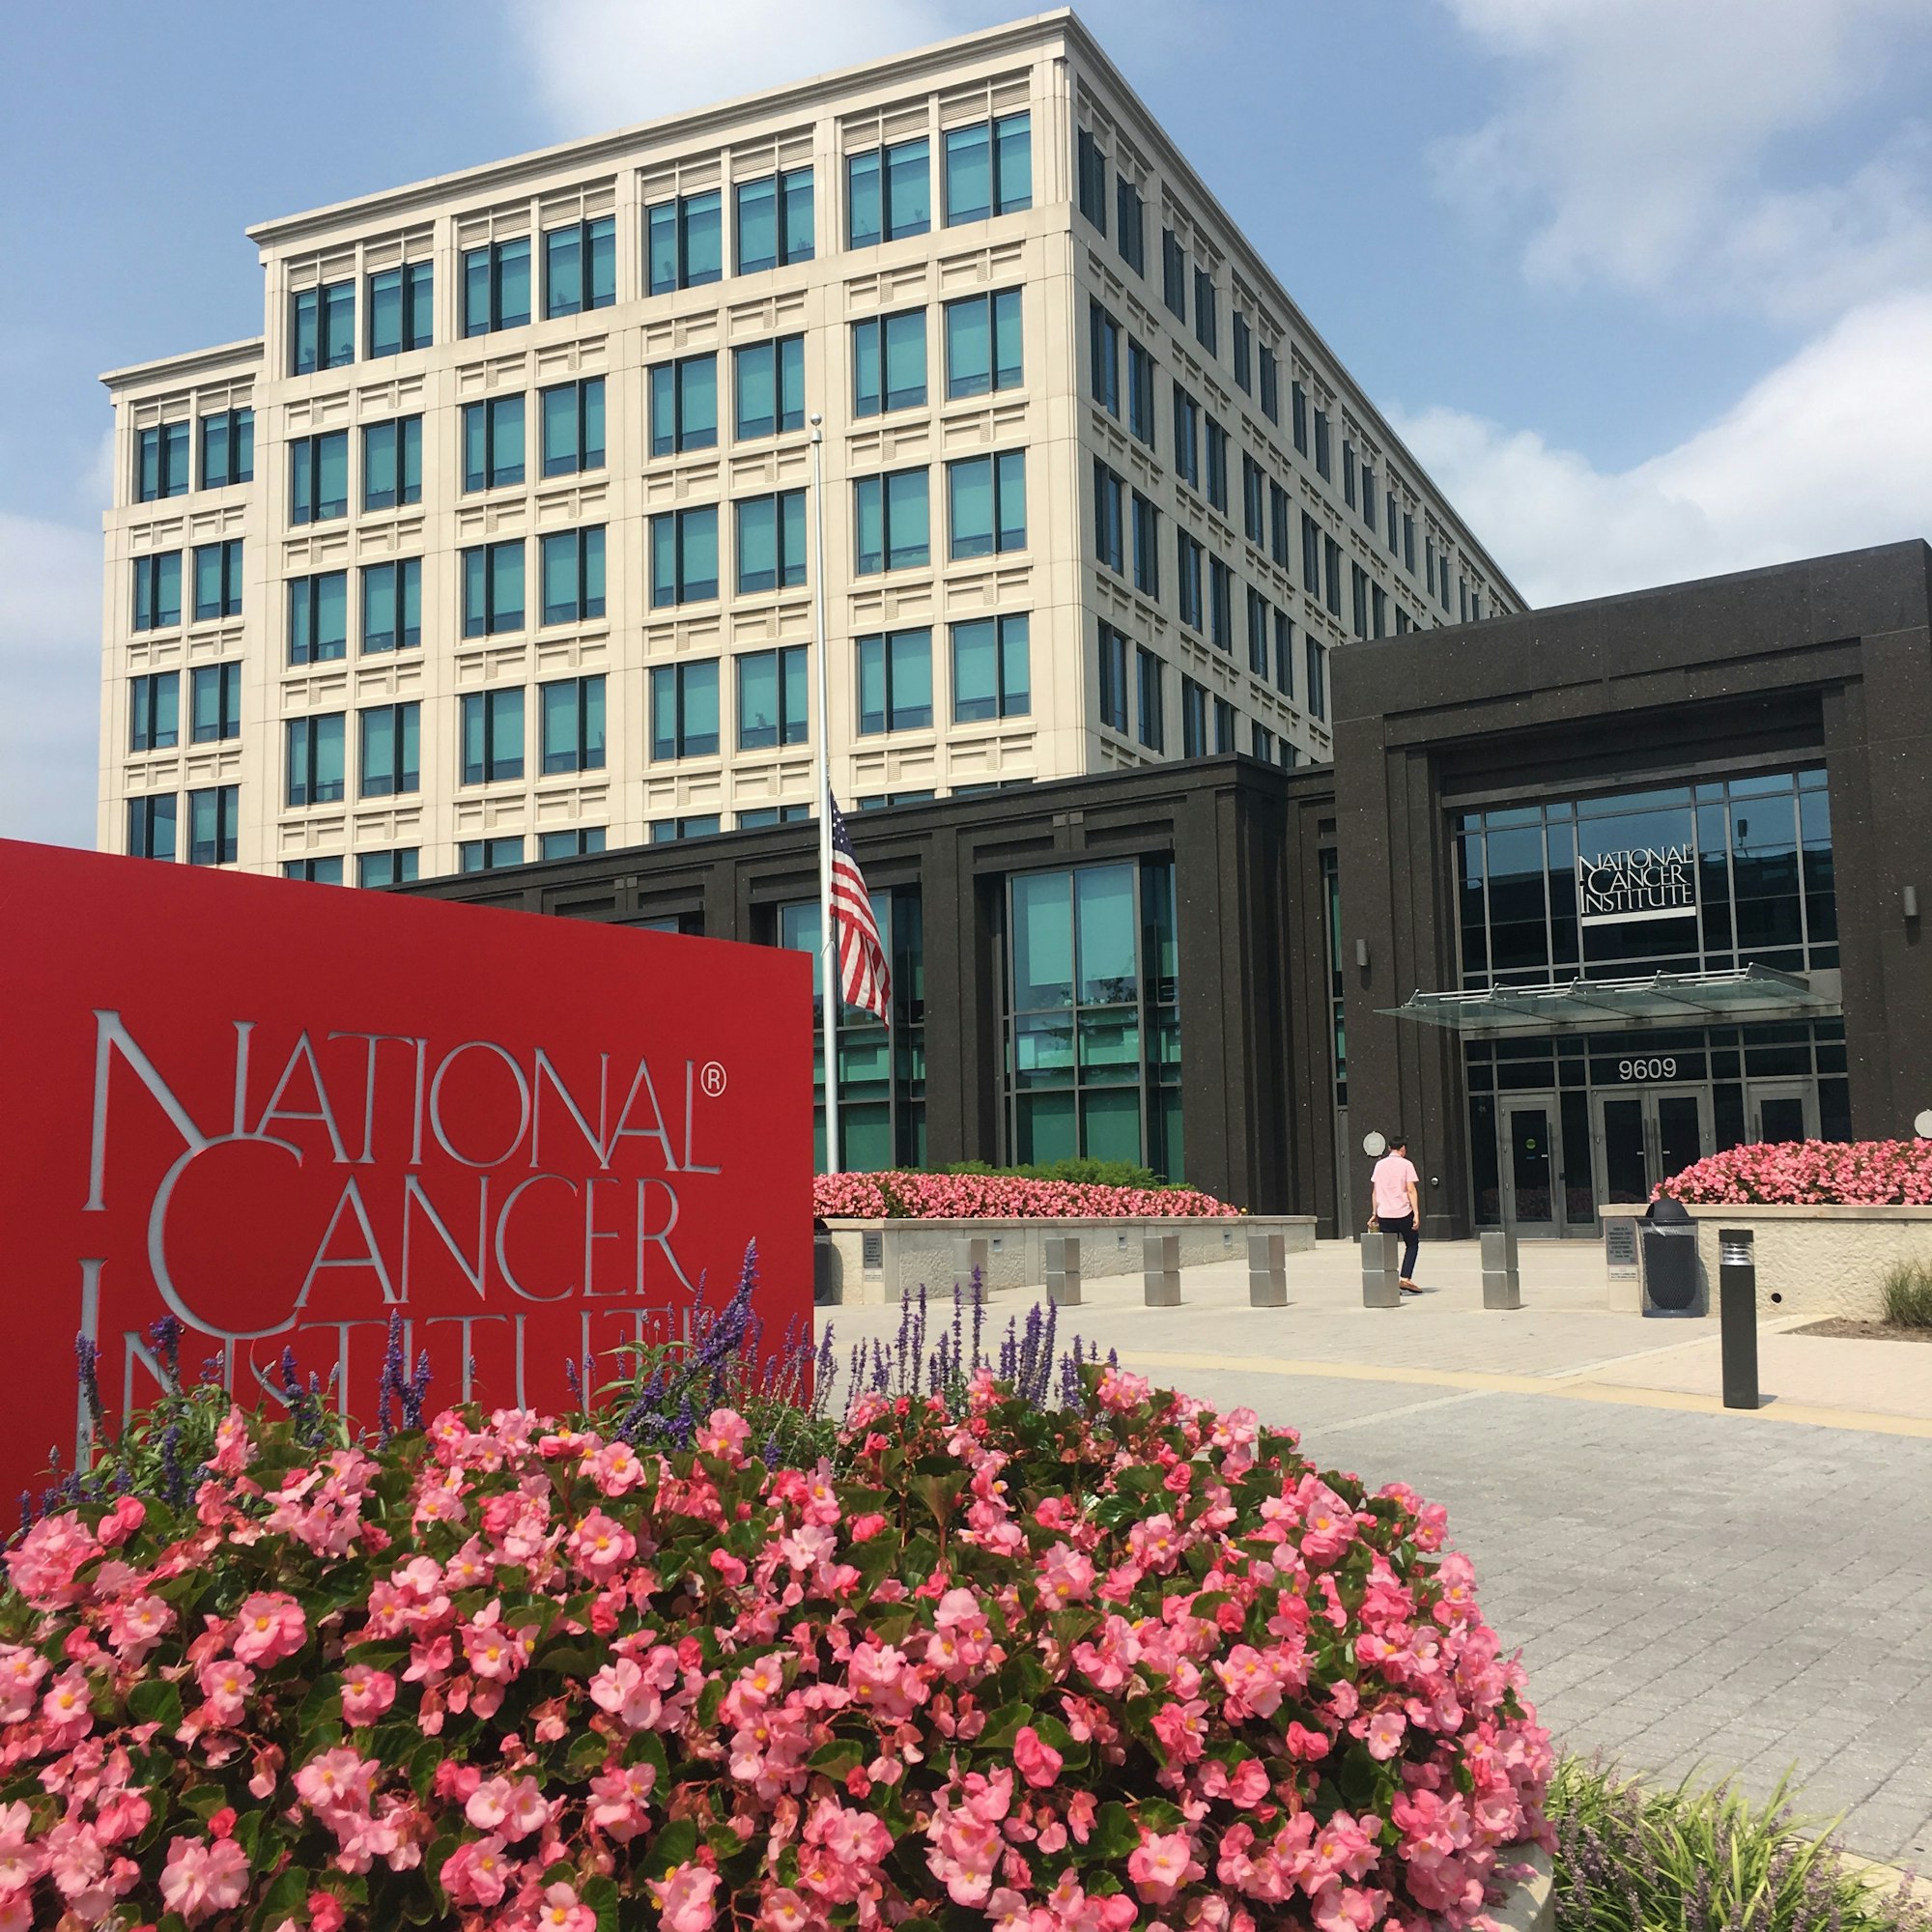 Exterior shot of the National Cancer Institute campus at Shady Grove, Maryland.